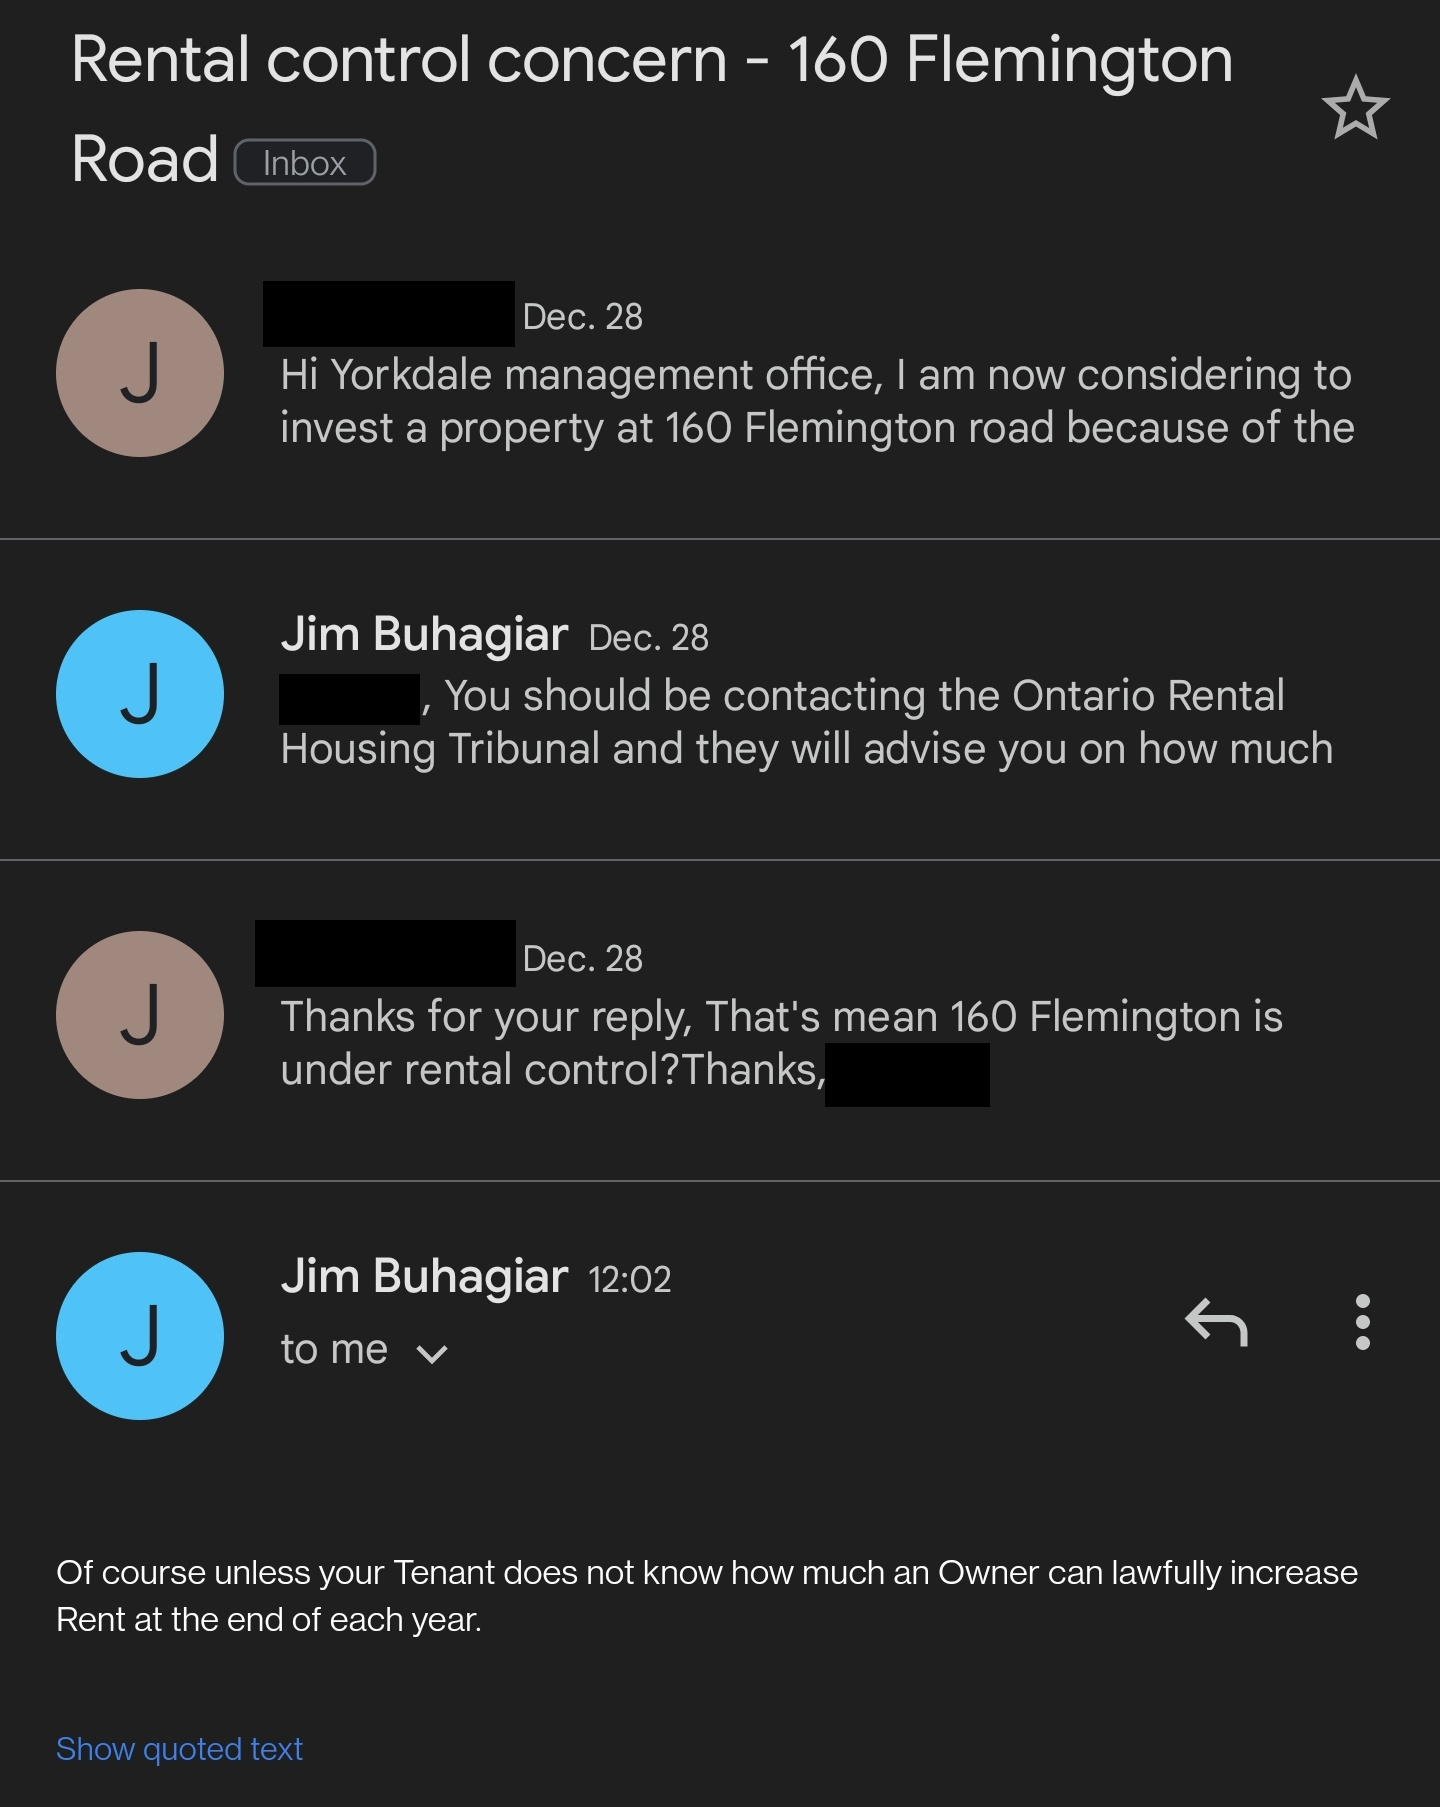 Jim Buhagiar suggest not telling tenants their rights in order to extort money from them.